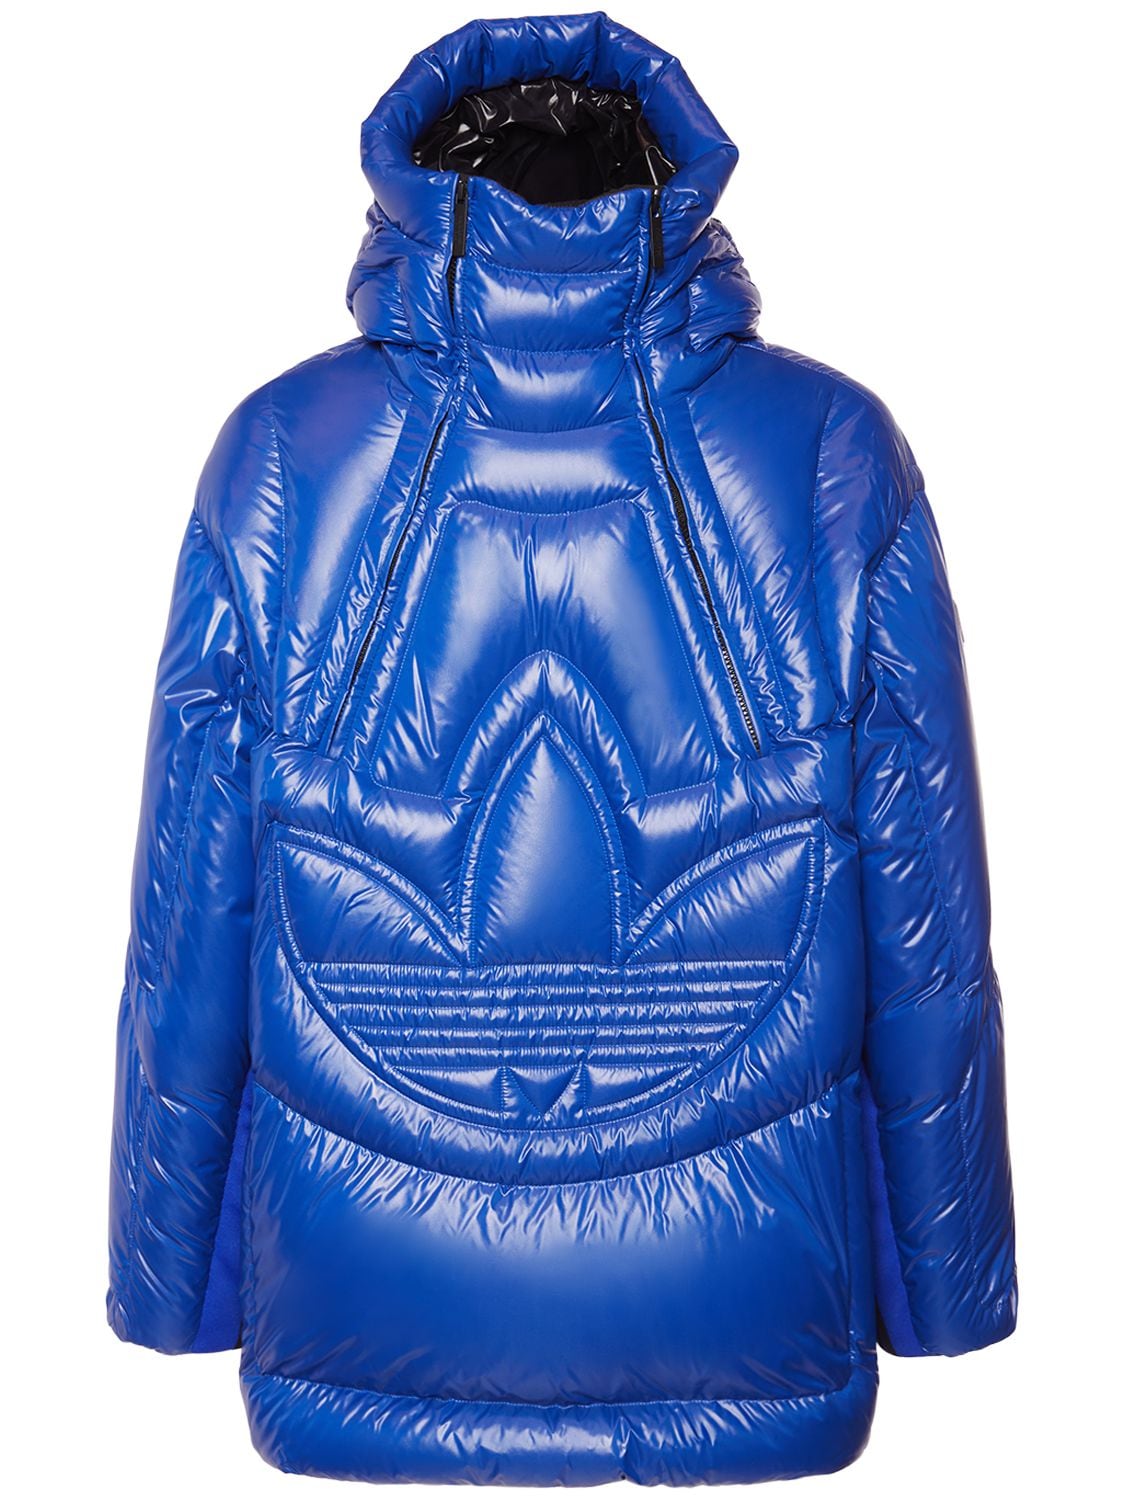 Moncler Genius Moncler X Adidas Chambery Down Jacket In Dark Blue